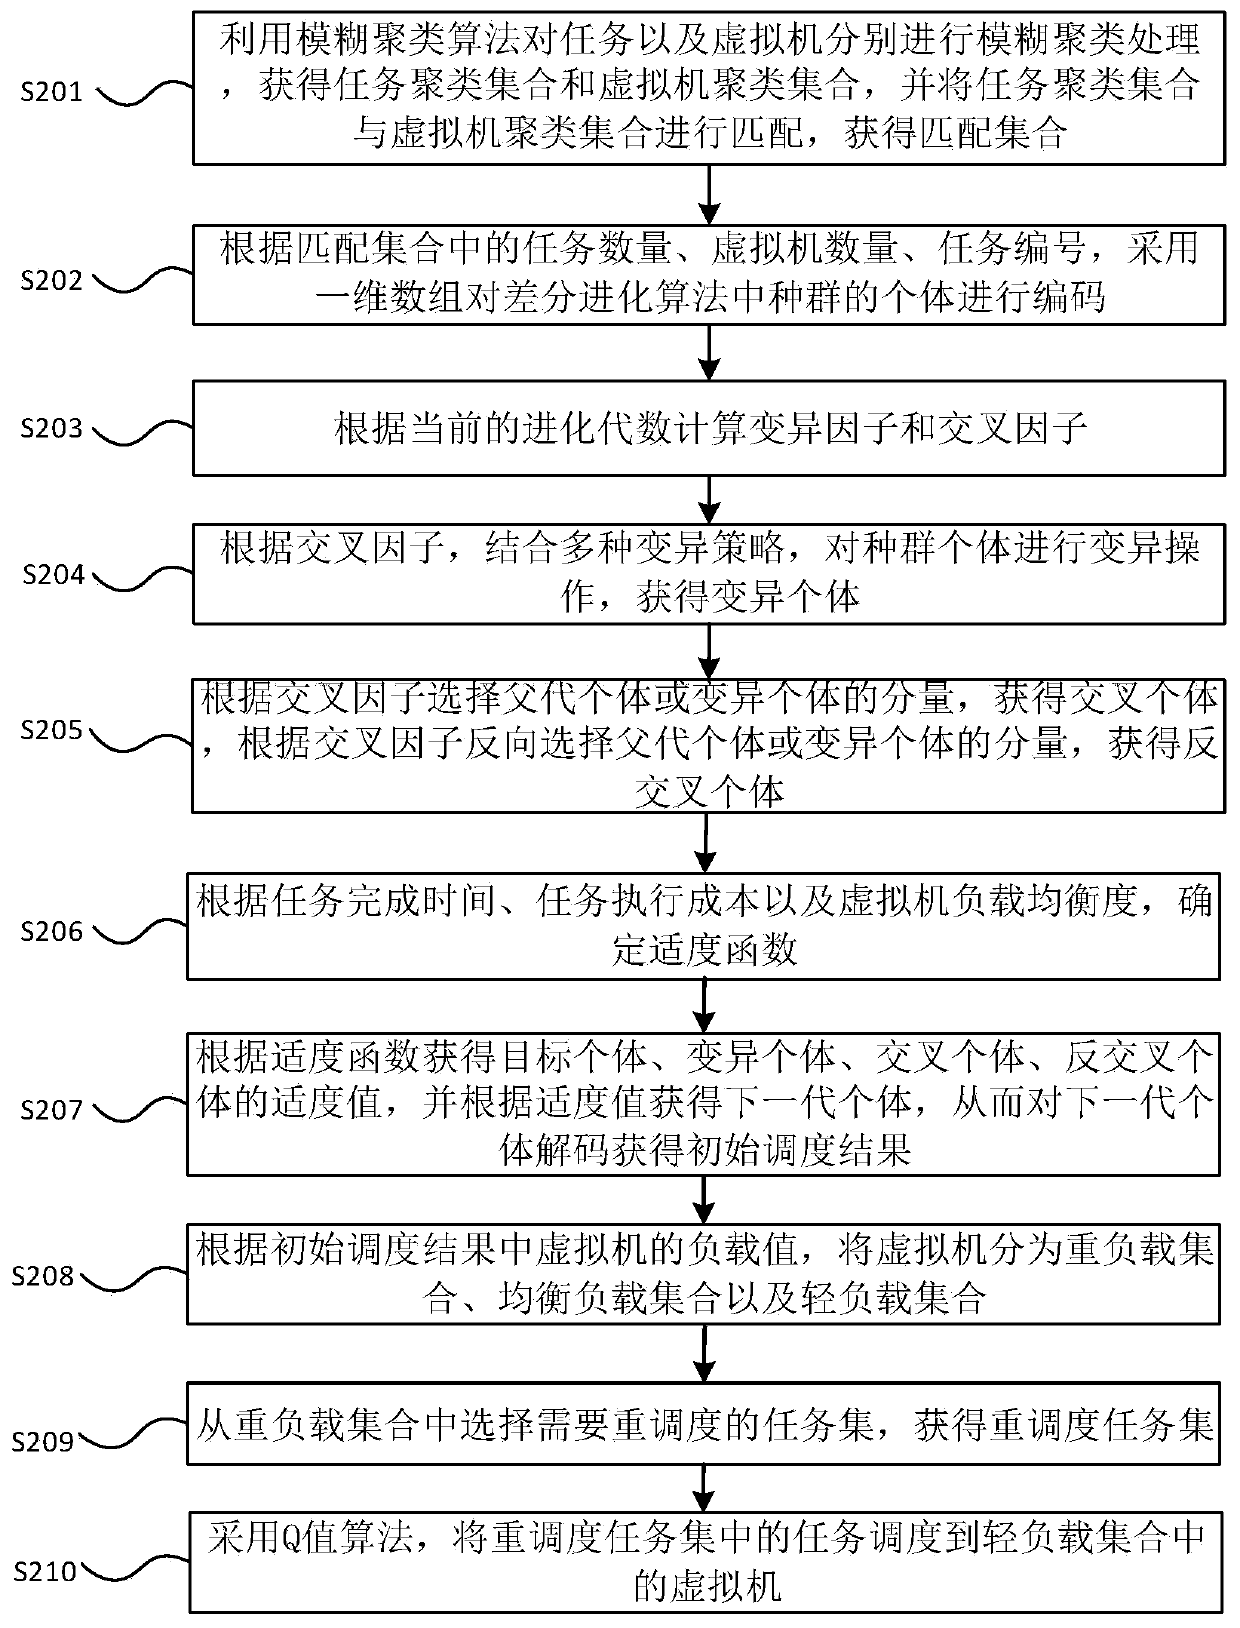 Multi-target task scheduling method and system